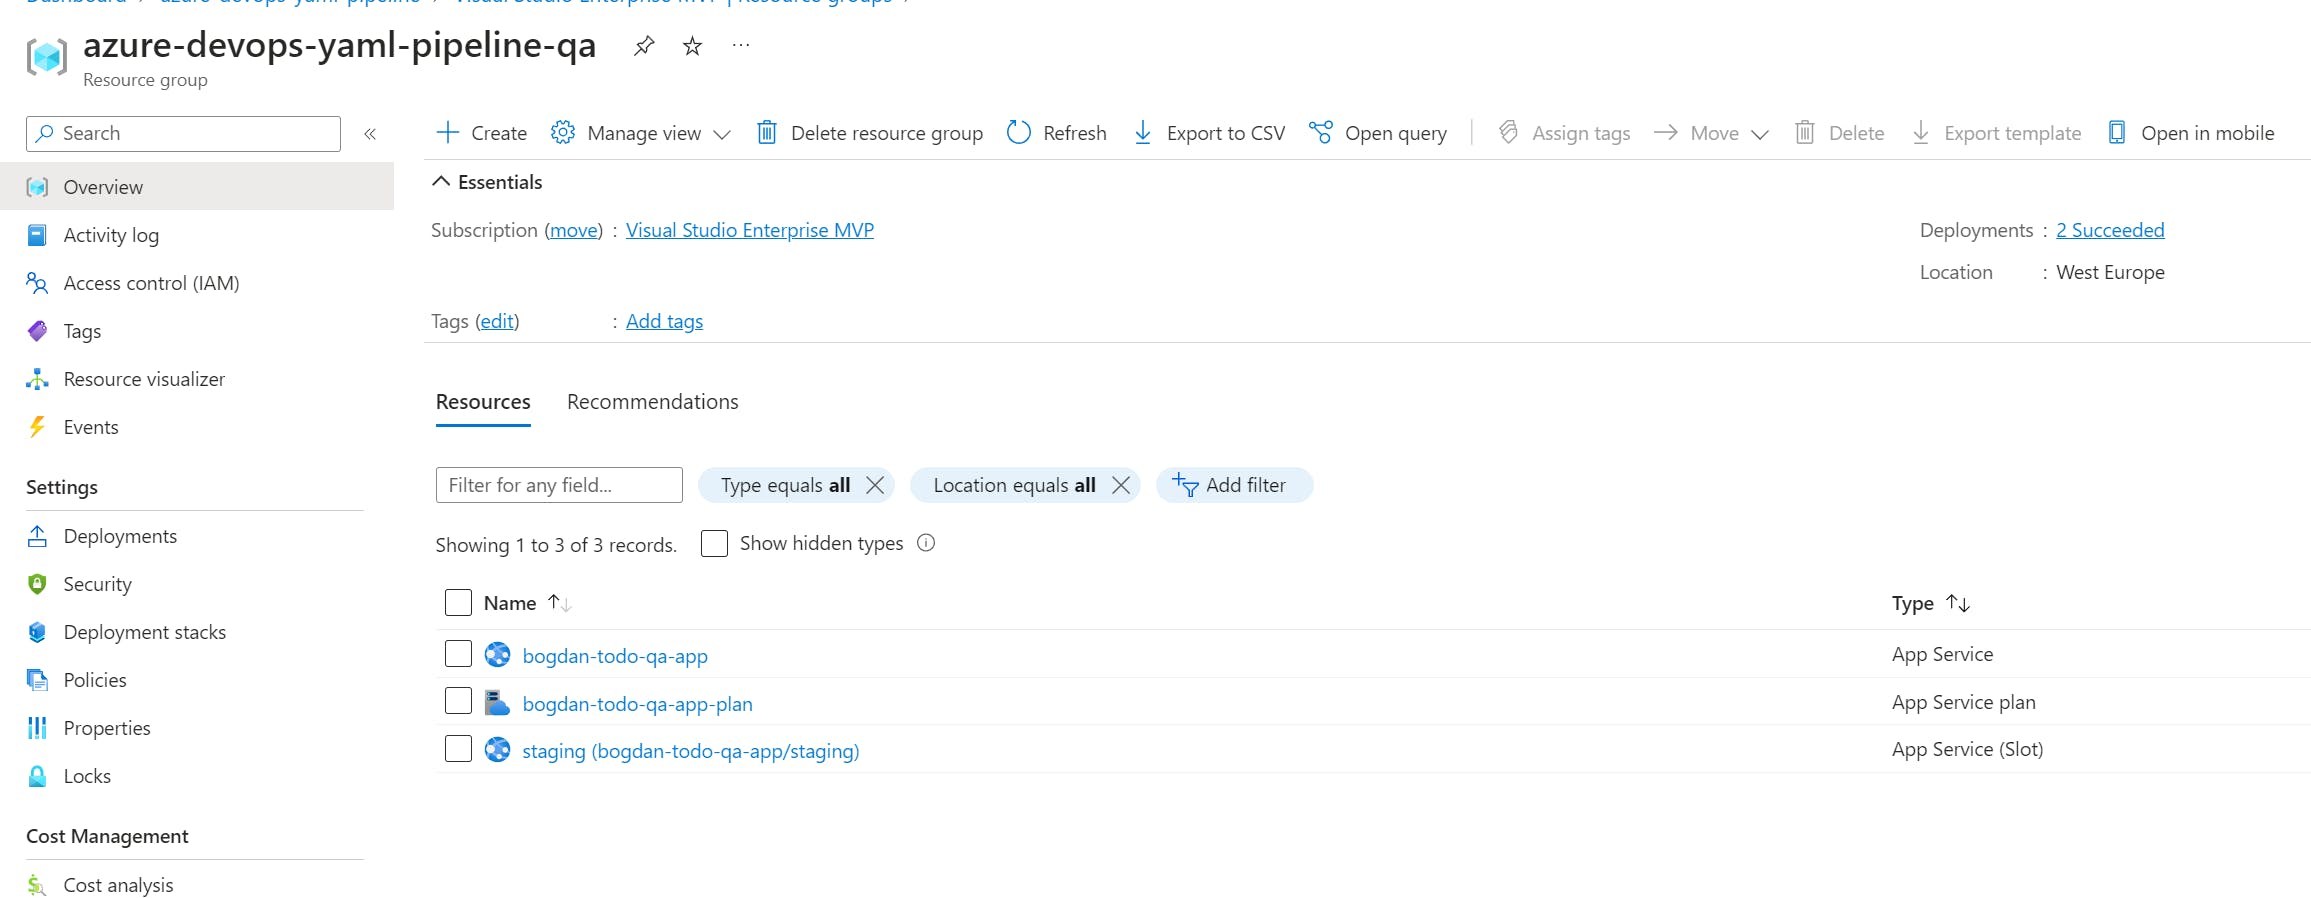 Azure resource group provisioned using Bicep and Azure DevOps YAML pipelines